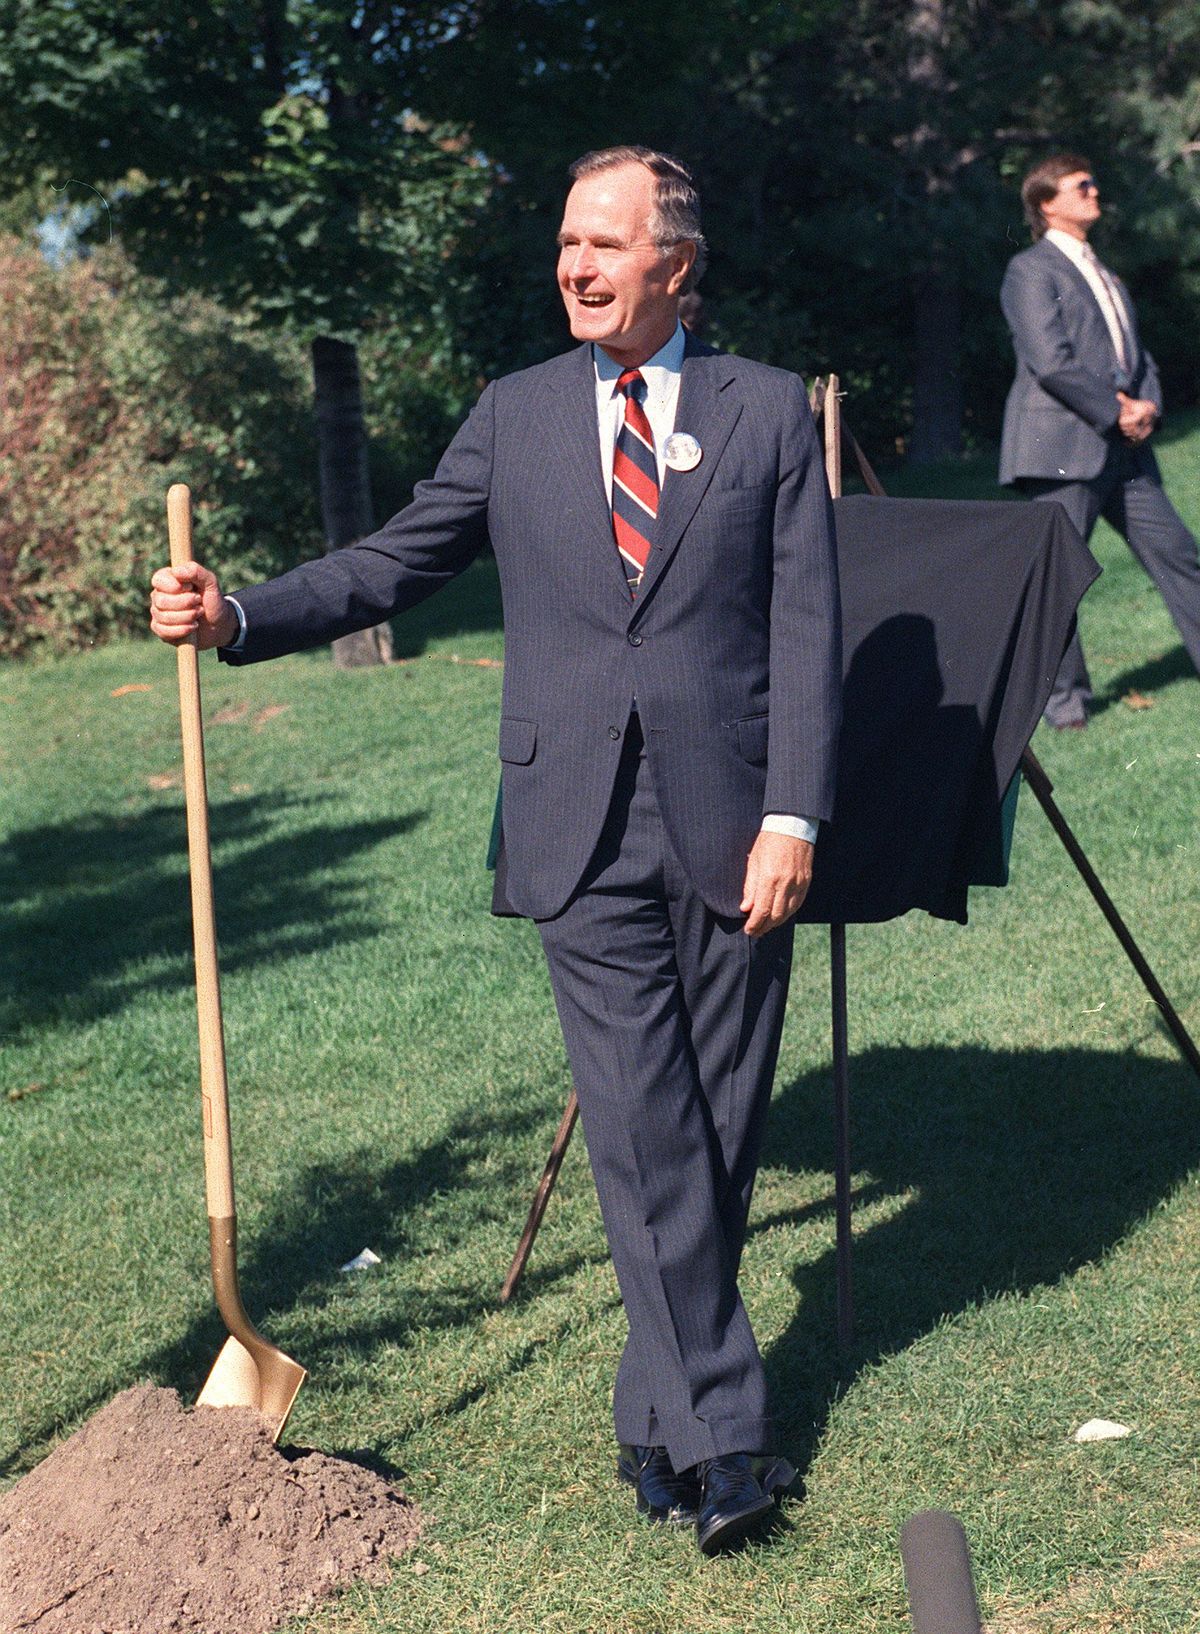 President George H. W. Bush visited Spokane on Sept. 18 and 19, 1989, to celebrate Washington state’s centennial and helped plant a tree in Riverfront Park. (Spokesman-Review photo archives)